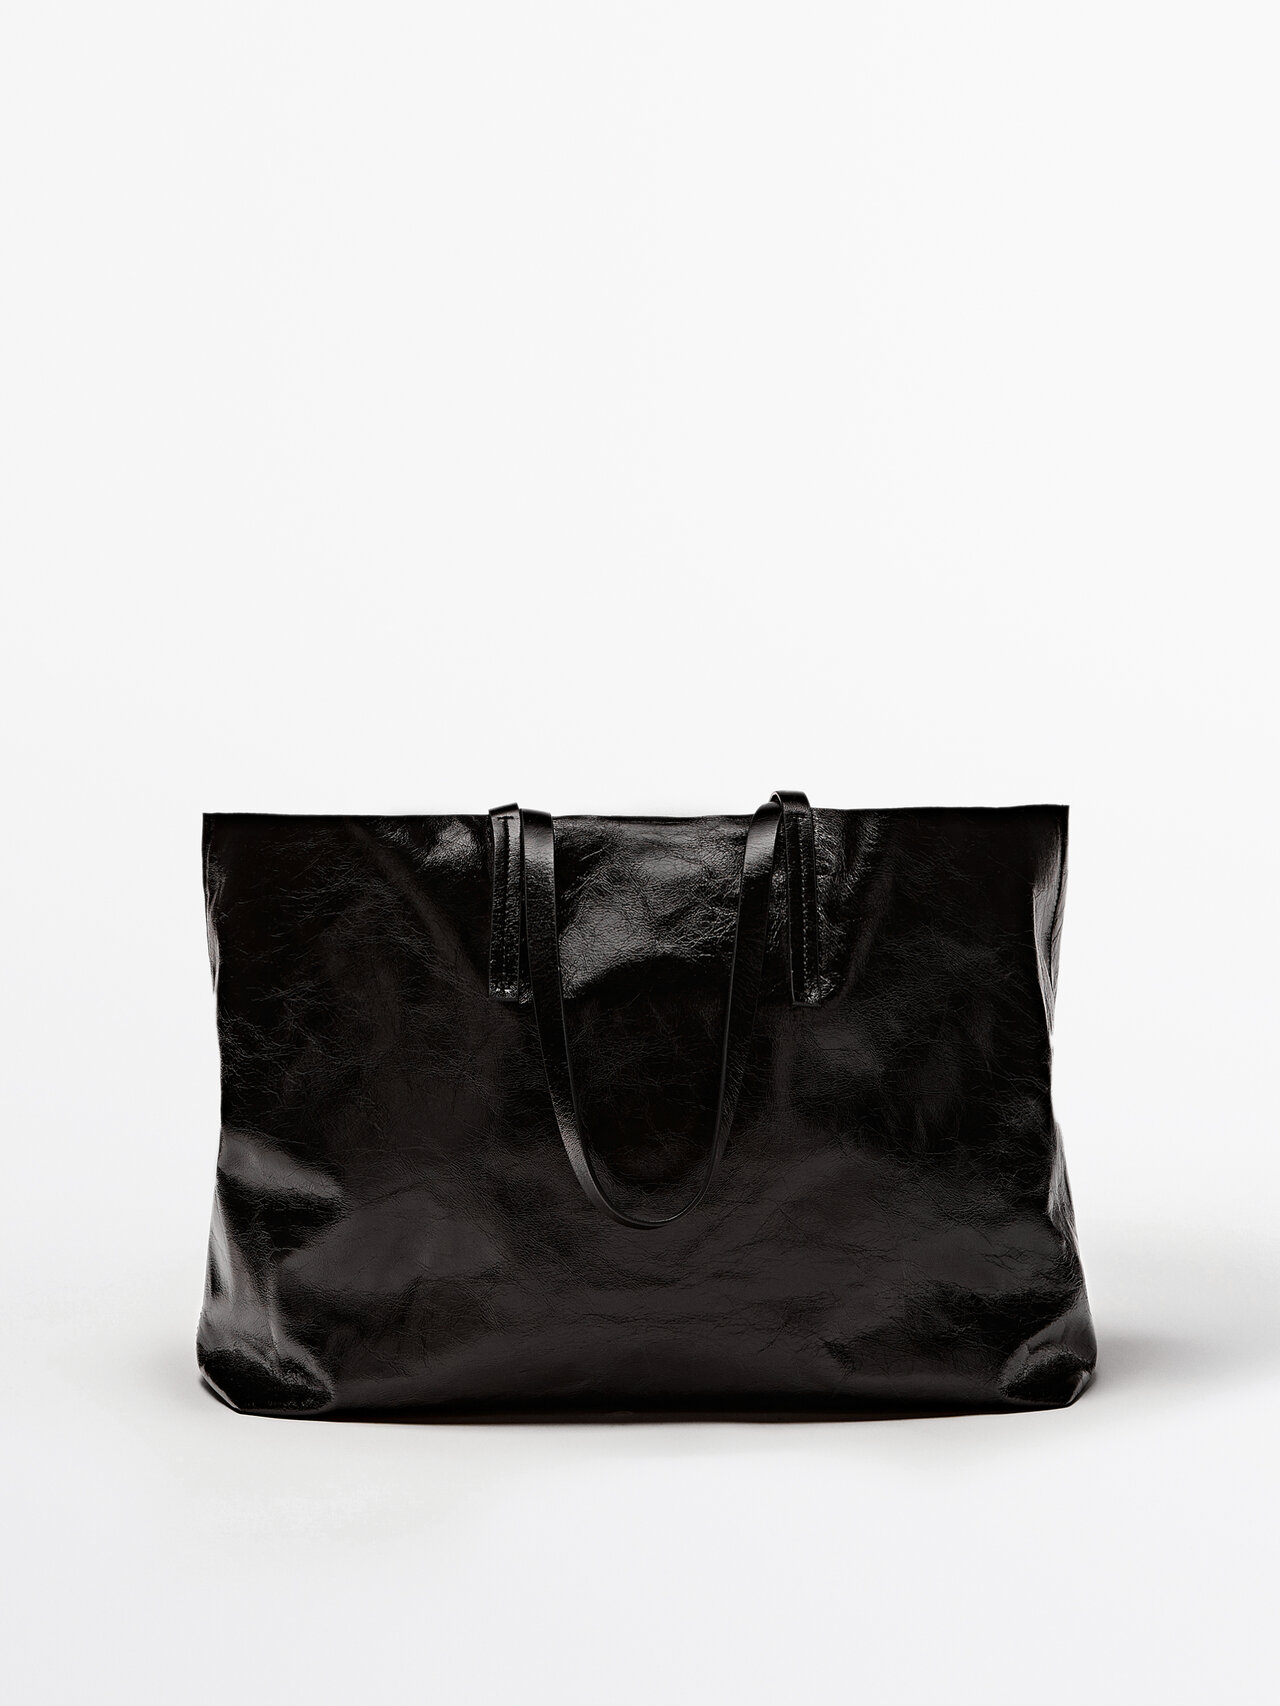 Massimo Dutti Leather Tote Bag With A Crackled Finish In Black